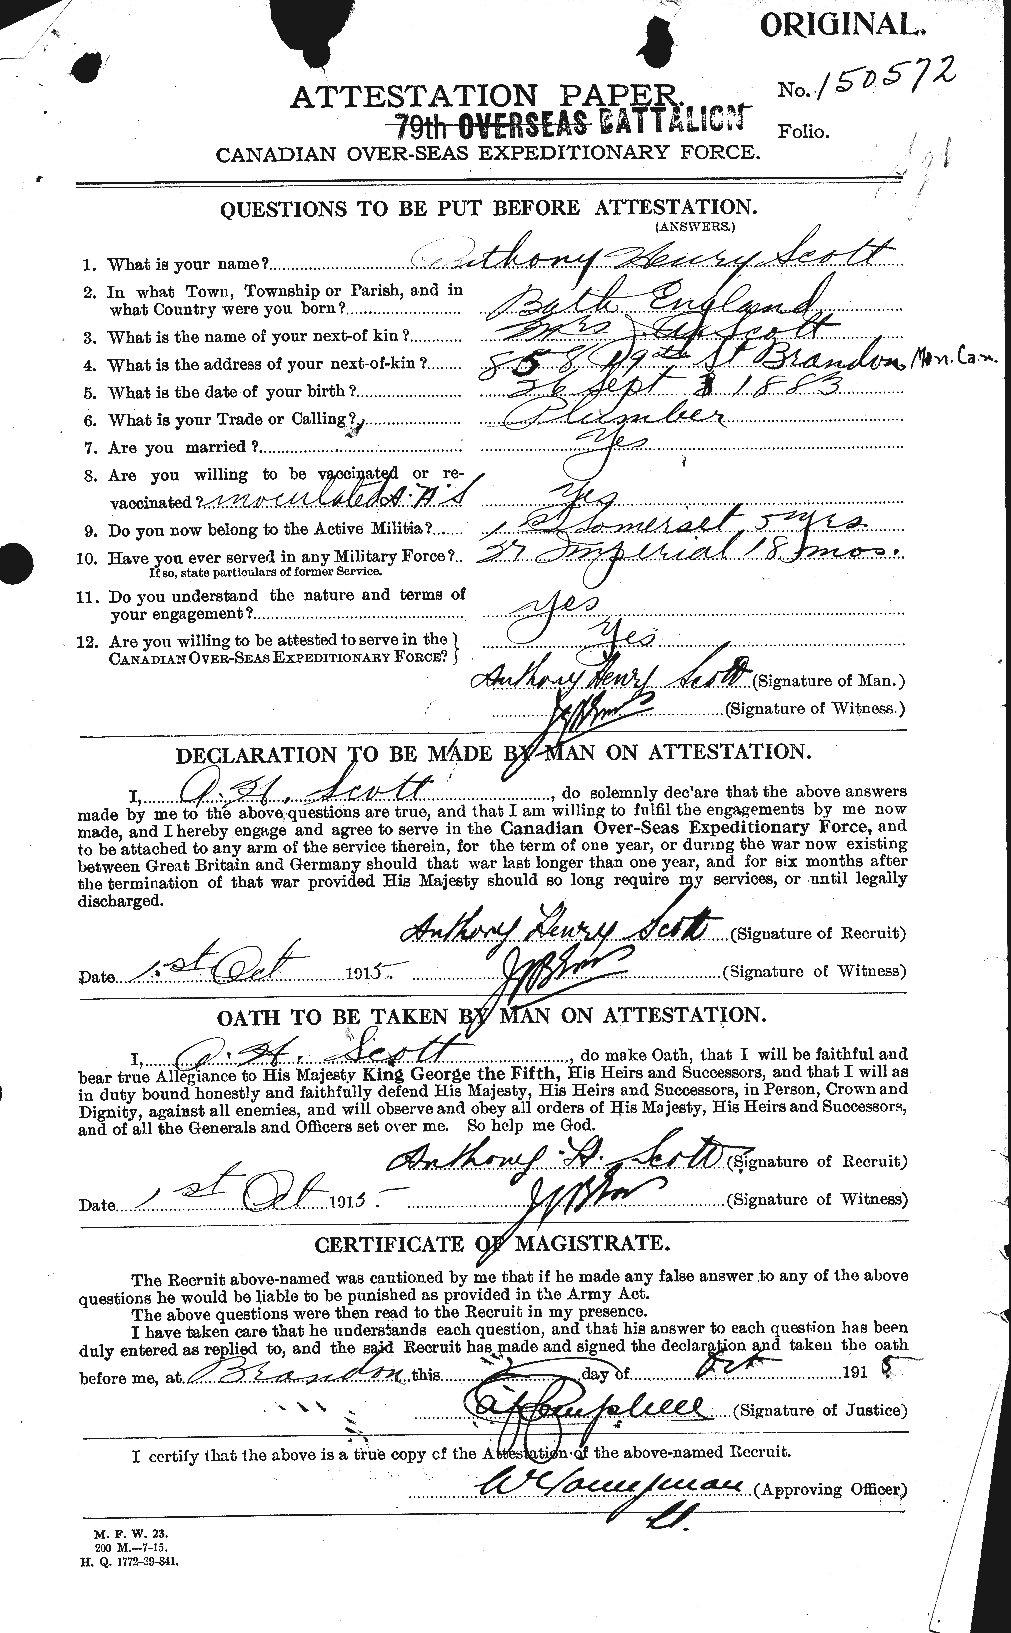 Personnel Records of the First World War - CEF 086432a